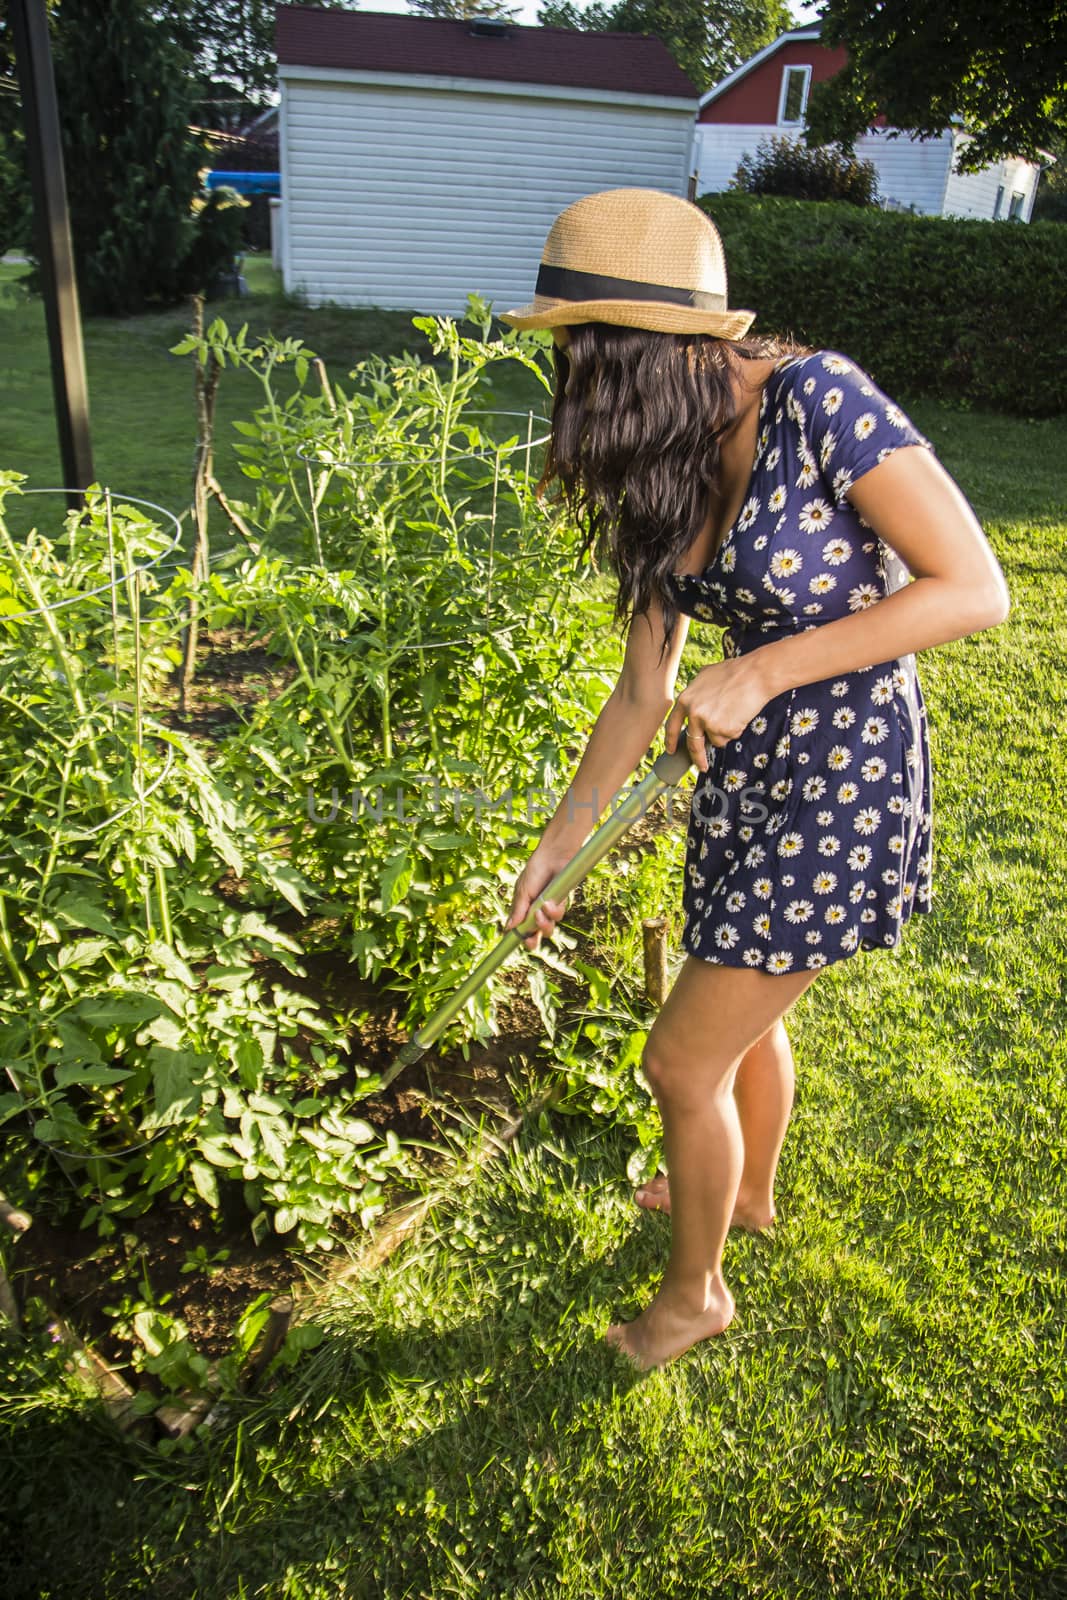 twenty something woman standing outside in the sun, wearing a sun dress and a straw hat, working her garden with a tool